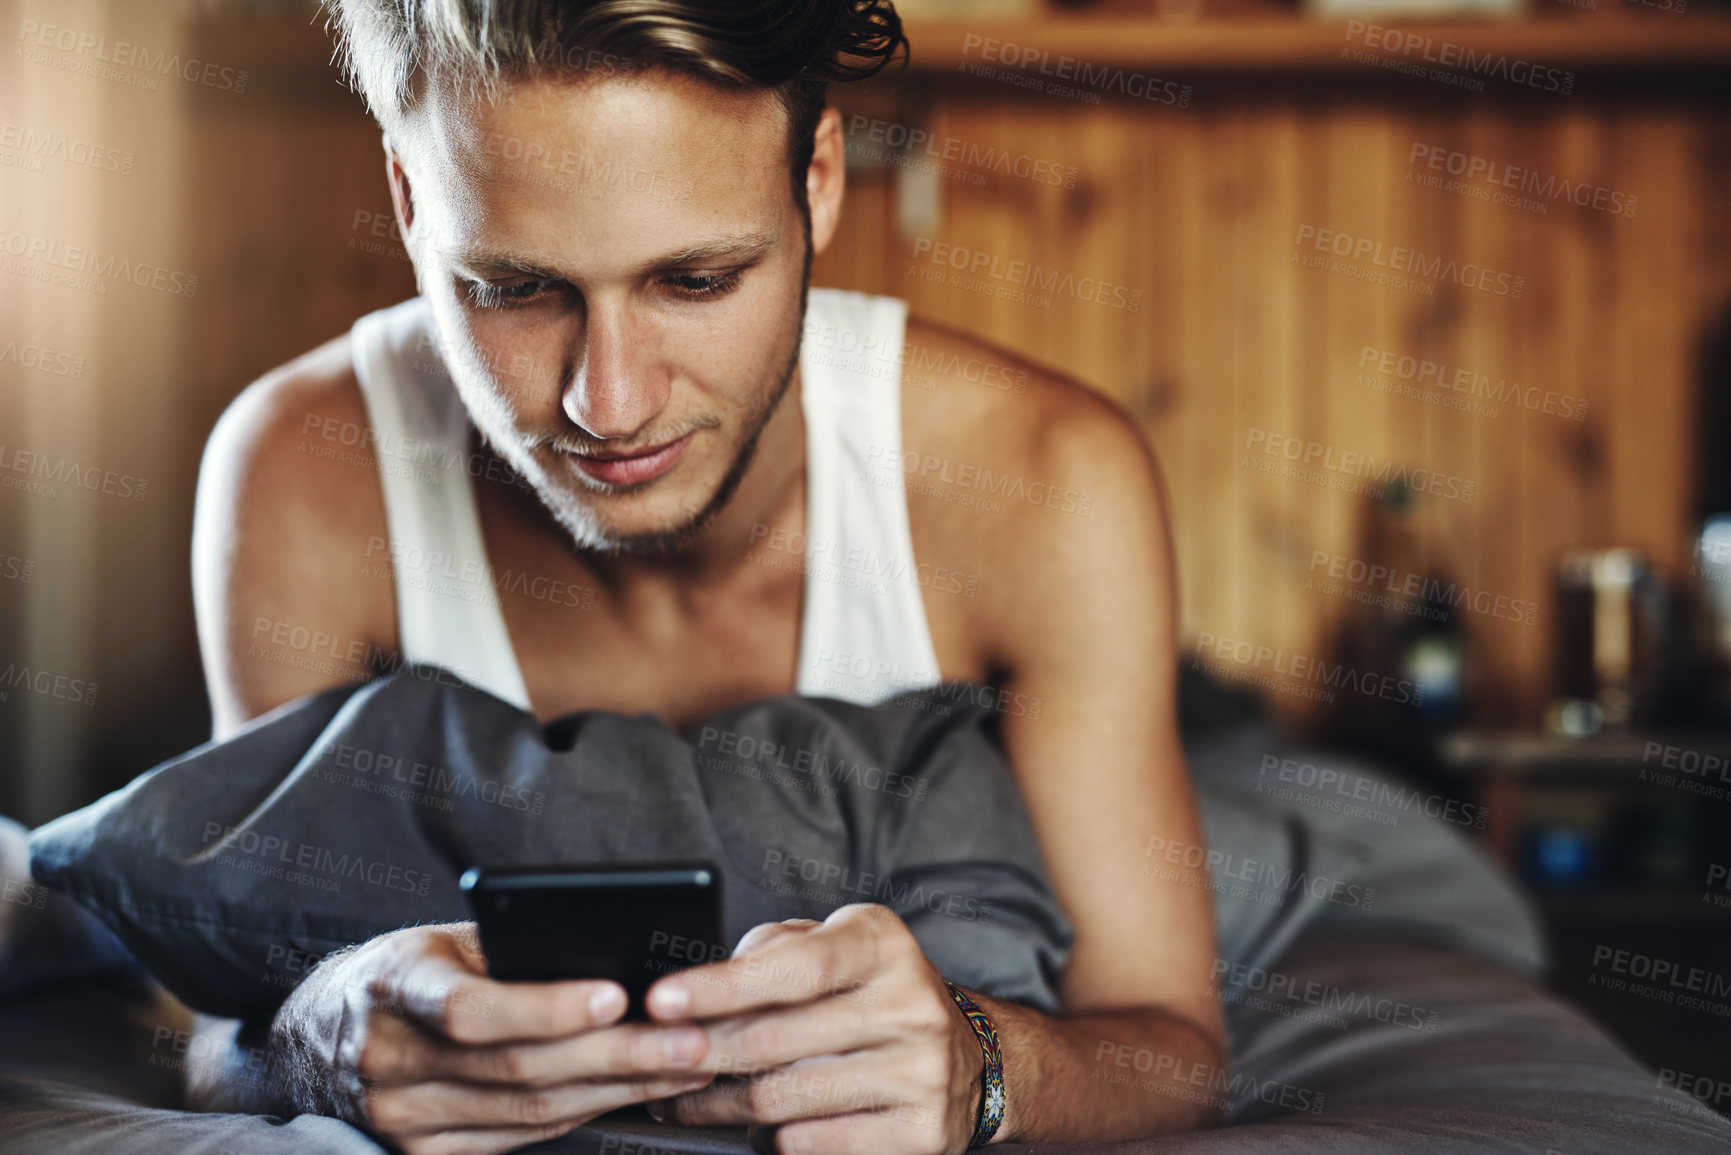 Buy stock photo Shot of a handsome young man using his cellphone while relaxing bed at home